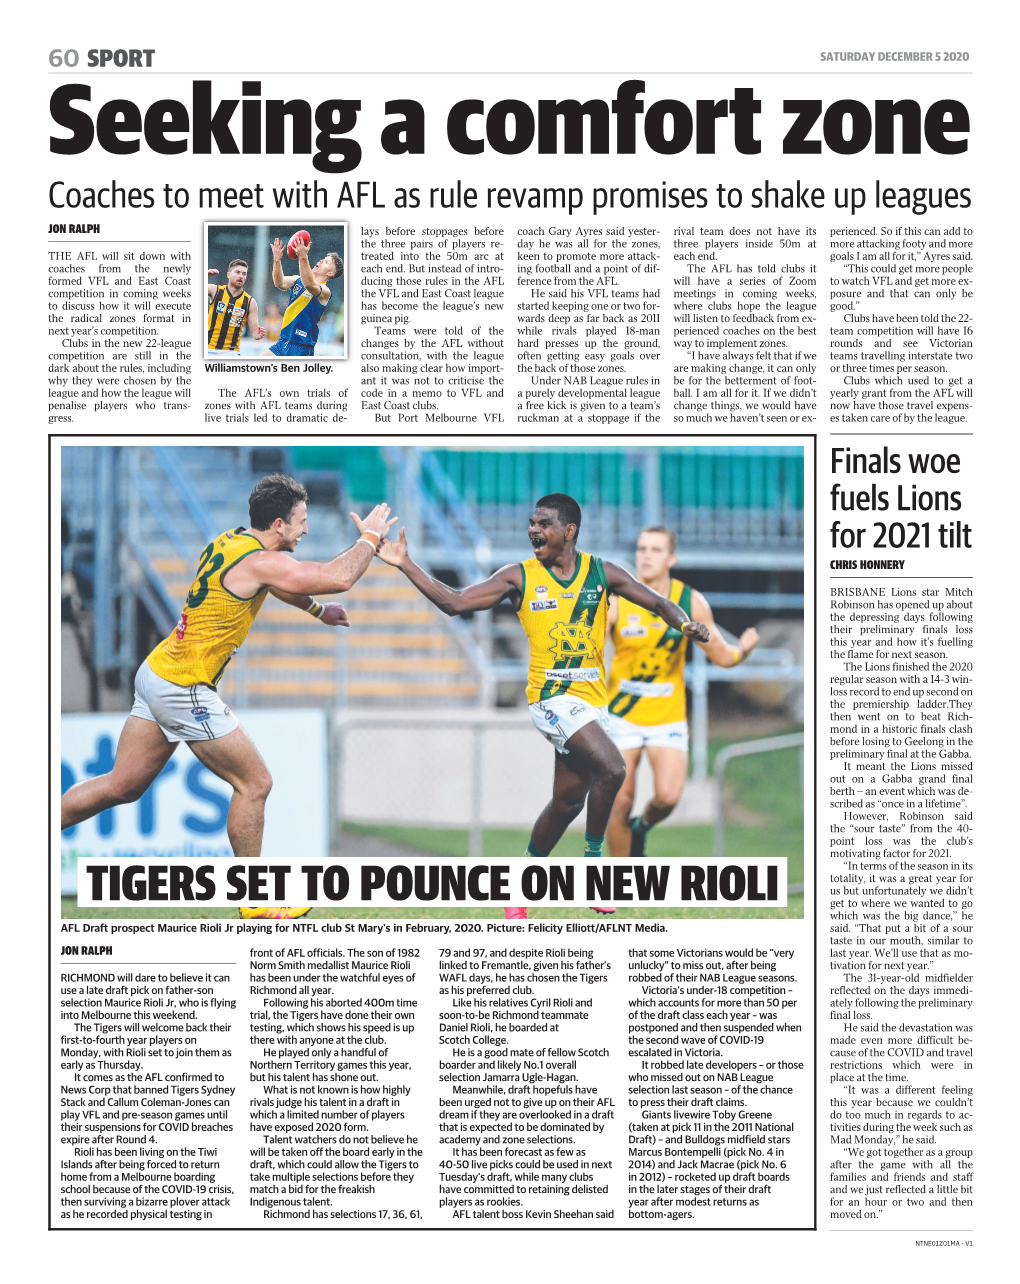 Tigers Set to Pounce on New Rioli